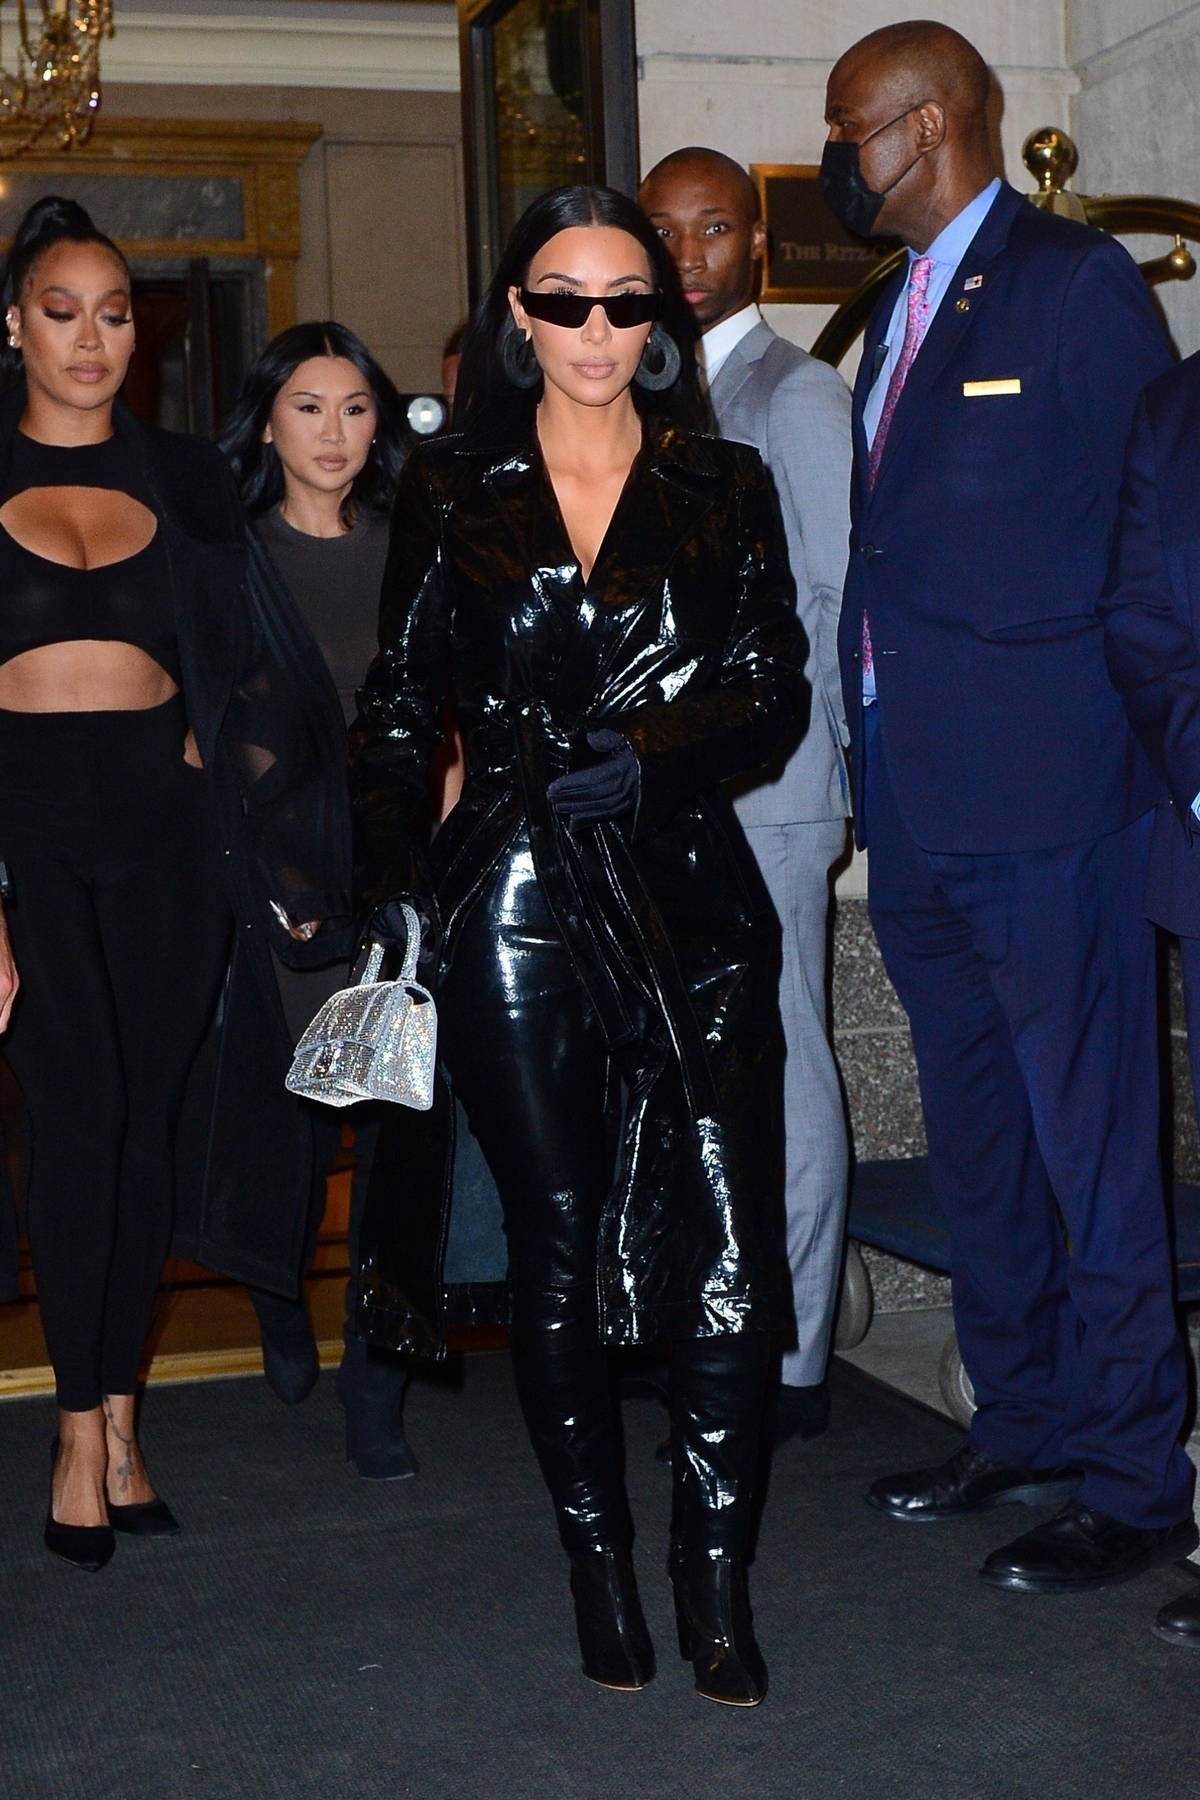 kim-kardashian-rocks-an-all-black-vinyl-look-while-as-she-leaves-her-hotel-for-a-night-out-in-new-york-city-110921_4.jpg